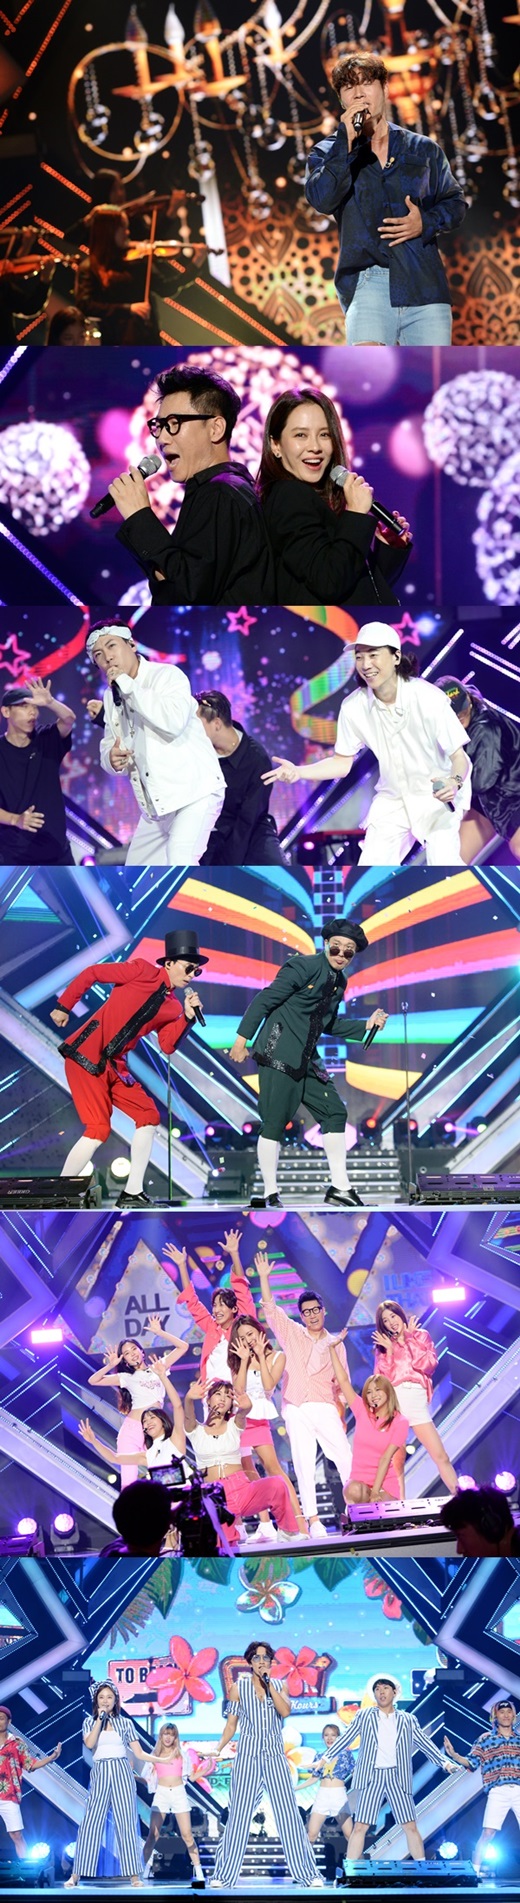 On SBS Running Man, which will be broadcast on the 15th (Sun), the second story of the 9th anniversary fan meeting T-Shirt will be held, and the collaboration stage with the artists of the Choi Jing Prize will be released and the individual stage of the members will be revealed.First, the members show individual stages for their fans only.Ji Suk-jin & Song Ji-hyo, who usually showed the Team-Tae-Gyeong-Gyeong-Gyeong-Chemmy, will show an unexpected appearance by preparing a duet song that emits fatal charm on stage.In addition, Kim Jong-kook shows off his creepy singing skills for fans by singing the song Aladdin OST Speechless, a topic song, in the aspect of a 24-year veteran singer, not a talented Kim Jong-kook.In addition, Lee Kwang-soo & Jeon So-min & Yang Se-chan Running Man youngest trio, which has been proud of their strong friendship within the team, has formed a new group for fans and presents unexpected surprise performance and amazing fan service.Meanwhile, while the sexy dance of Dumb Sisters was foreseen in the group dance, the two actresses also showed off their tremendous beauty and stole fans attention.The couple song of Yoo Jae-Suk & Haha, who won the duet stage with penalties, seems to be a big topic by bringing explosive field reaction with dance and colorful performance reminiscent of Michael Jackson.In particular, the stage with the domestic Choi Jing awards The Artists is also unveiled. The collaboration stage, which shines the fan meeting stage with various attractions filled with individuality of each team, can be seen at Running Man broadcasted at 5 pm on Sunday, 15th.